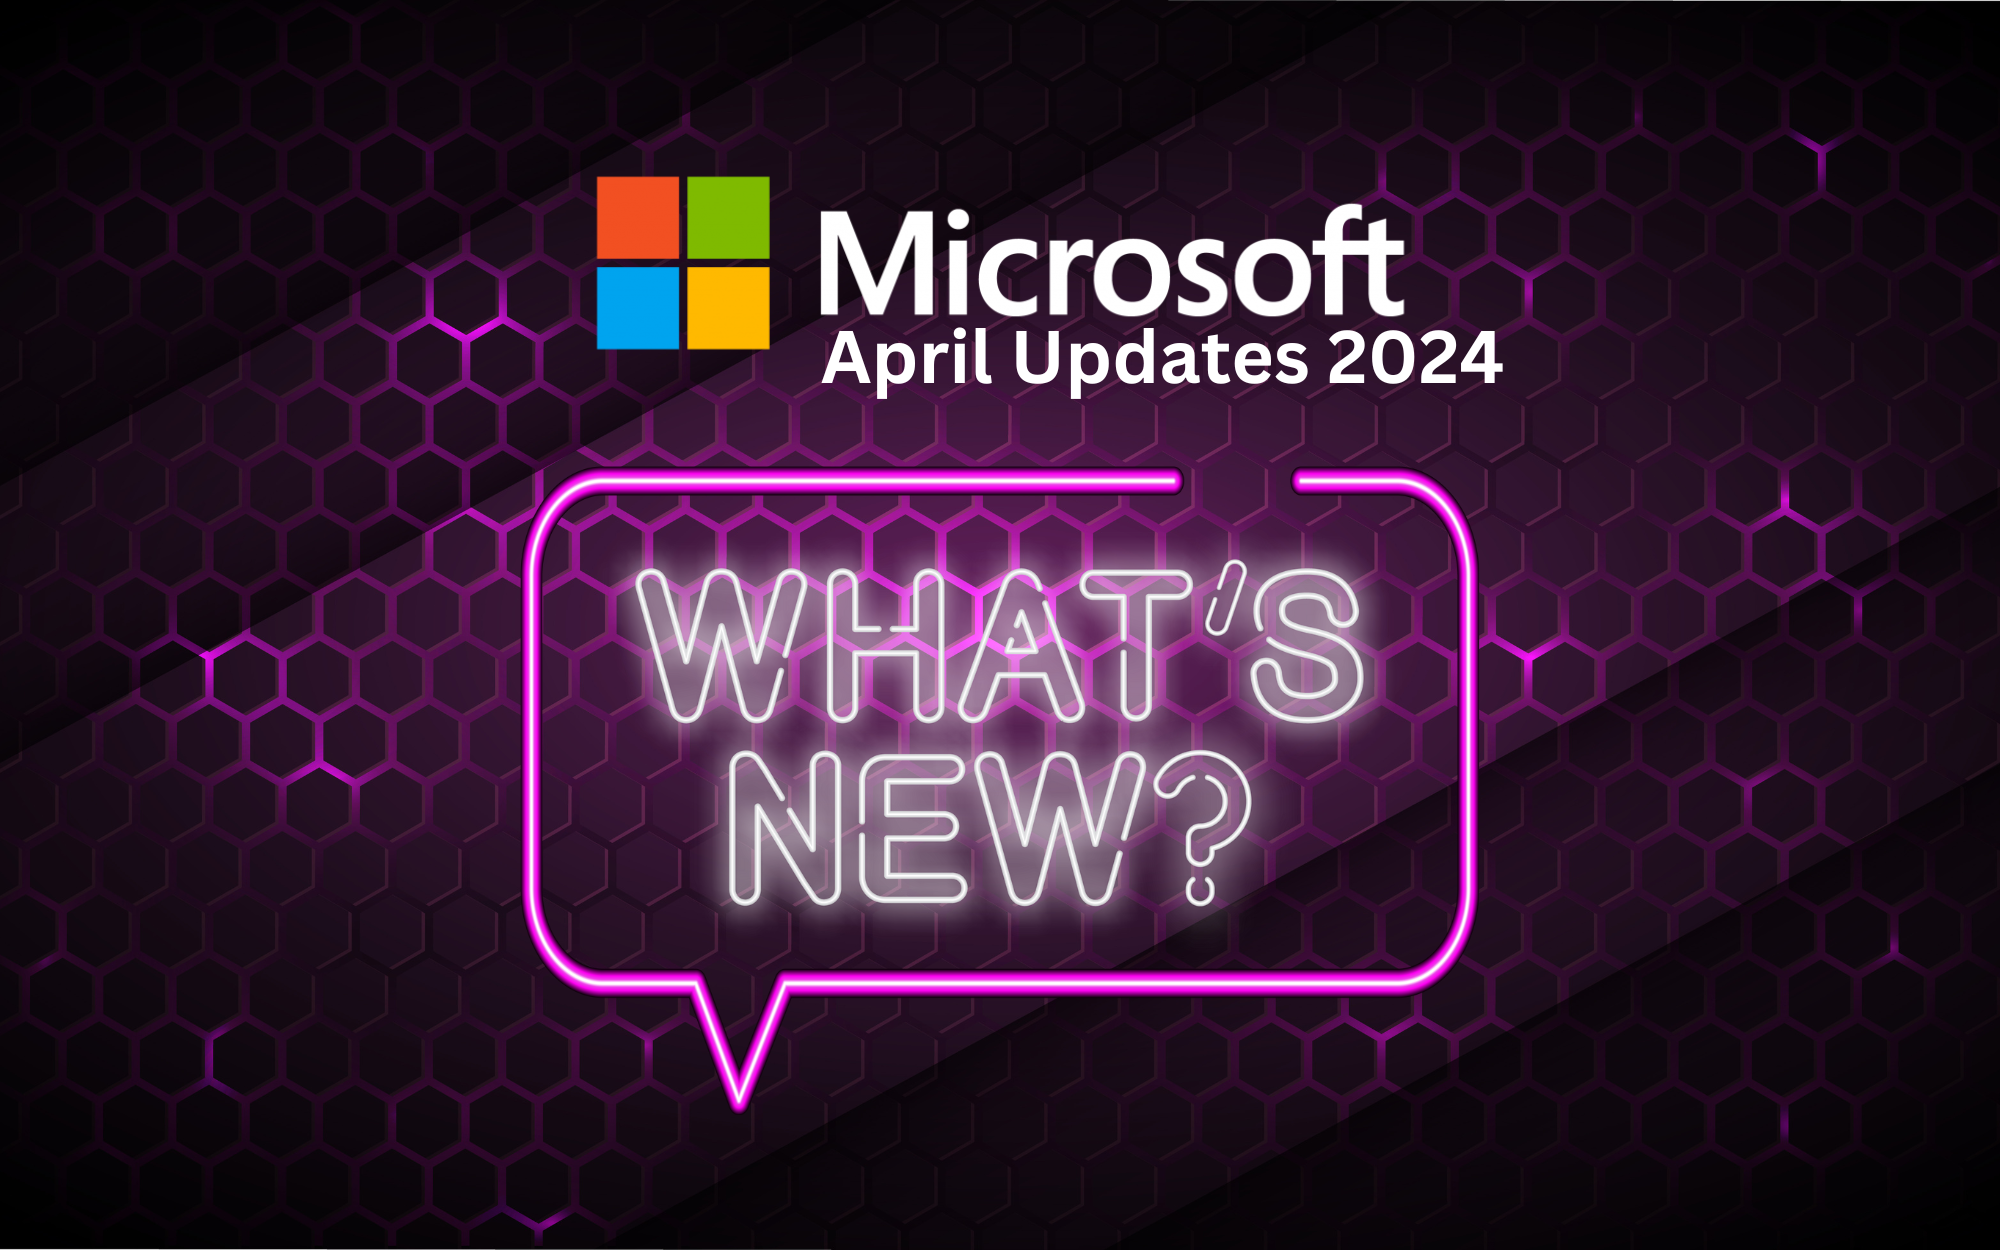 April Update: What's New in Microsoft - The Latest from Current Cloud